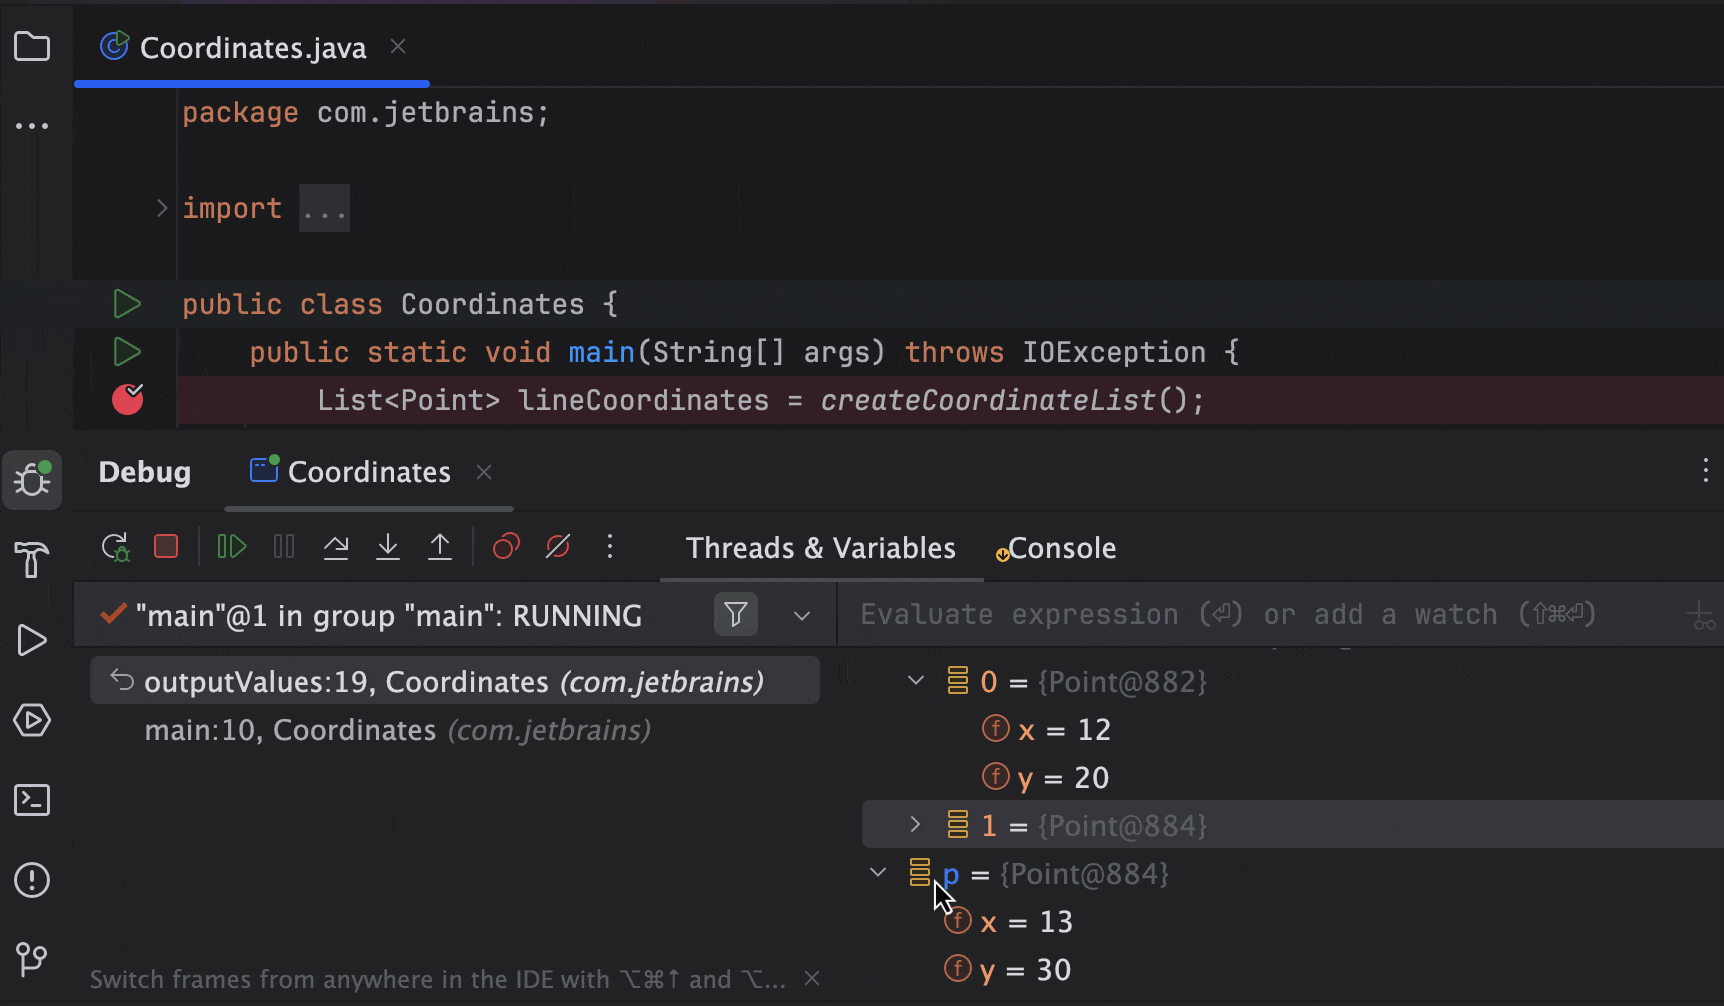 Jump to Source and Jump to Type Source through Debugger